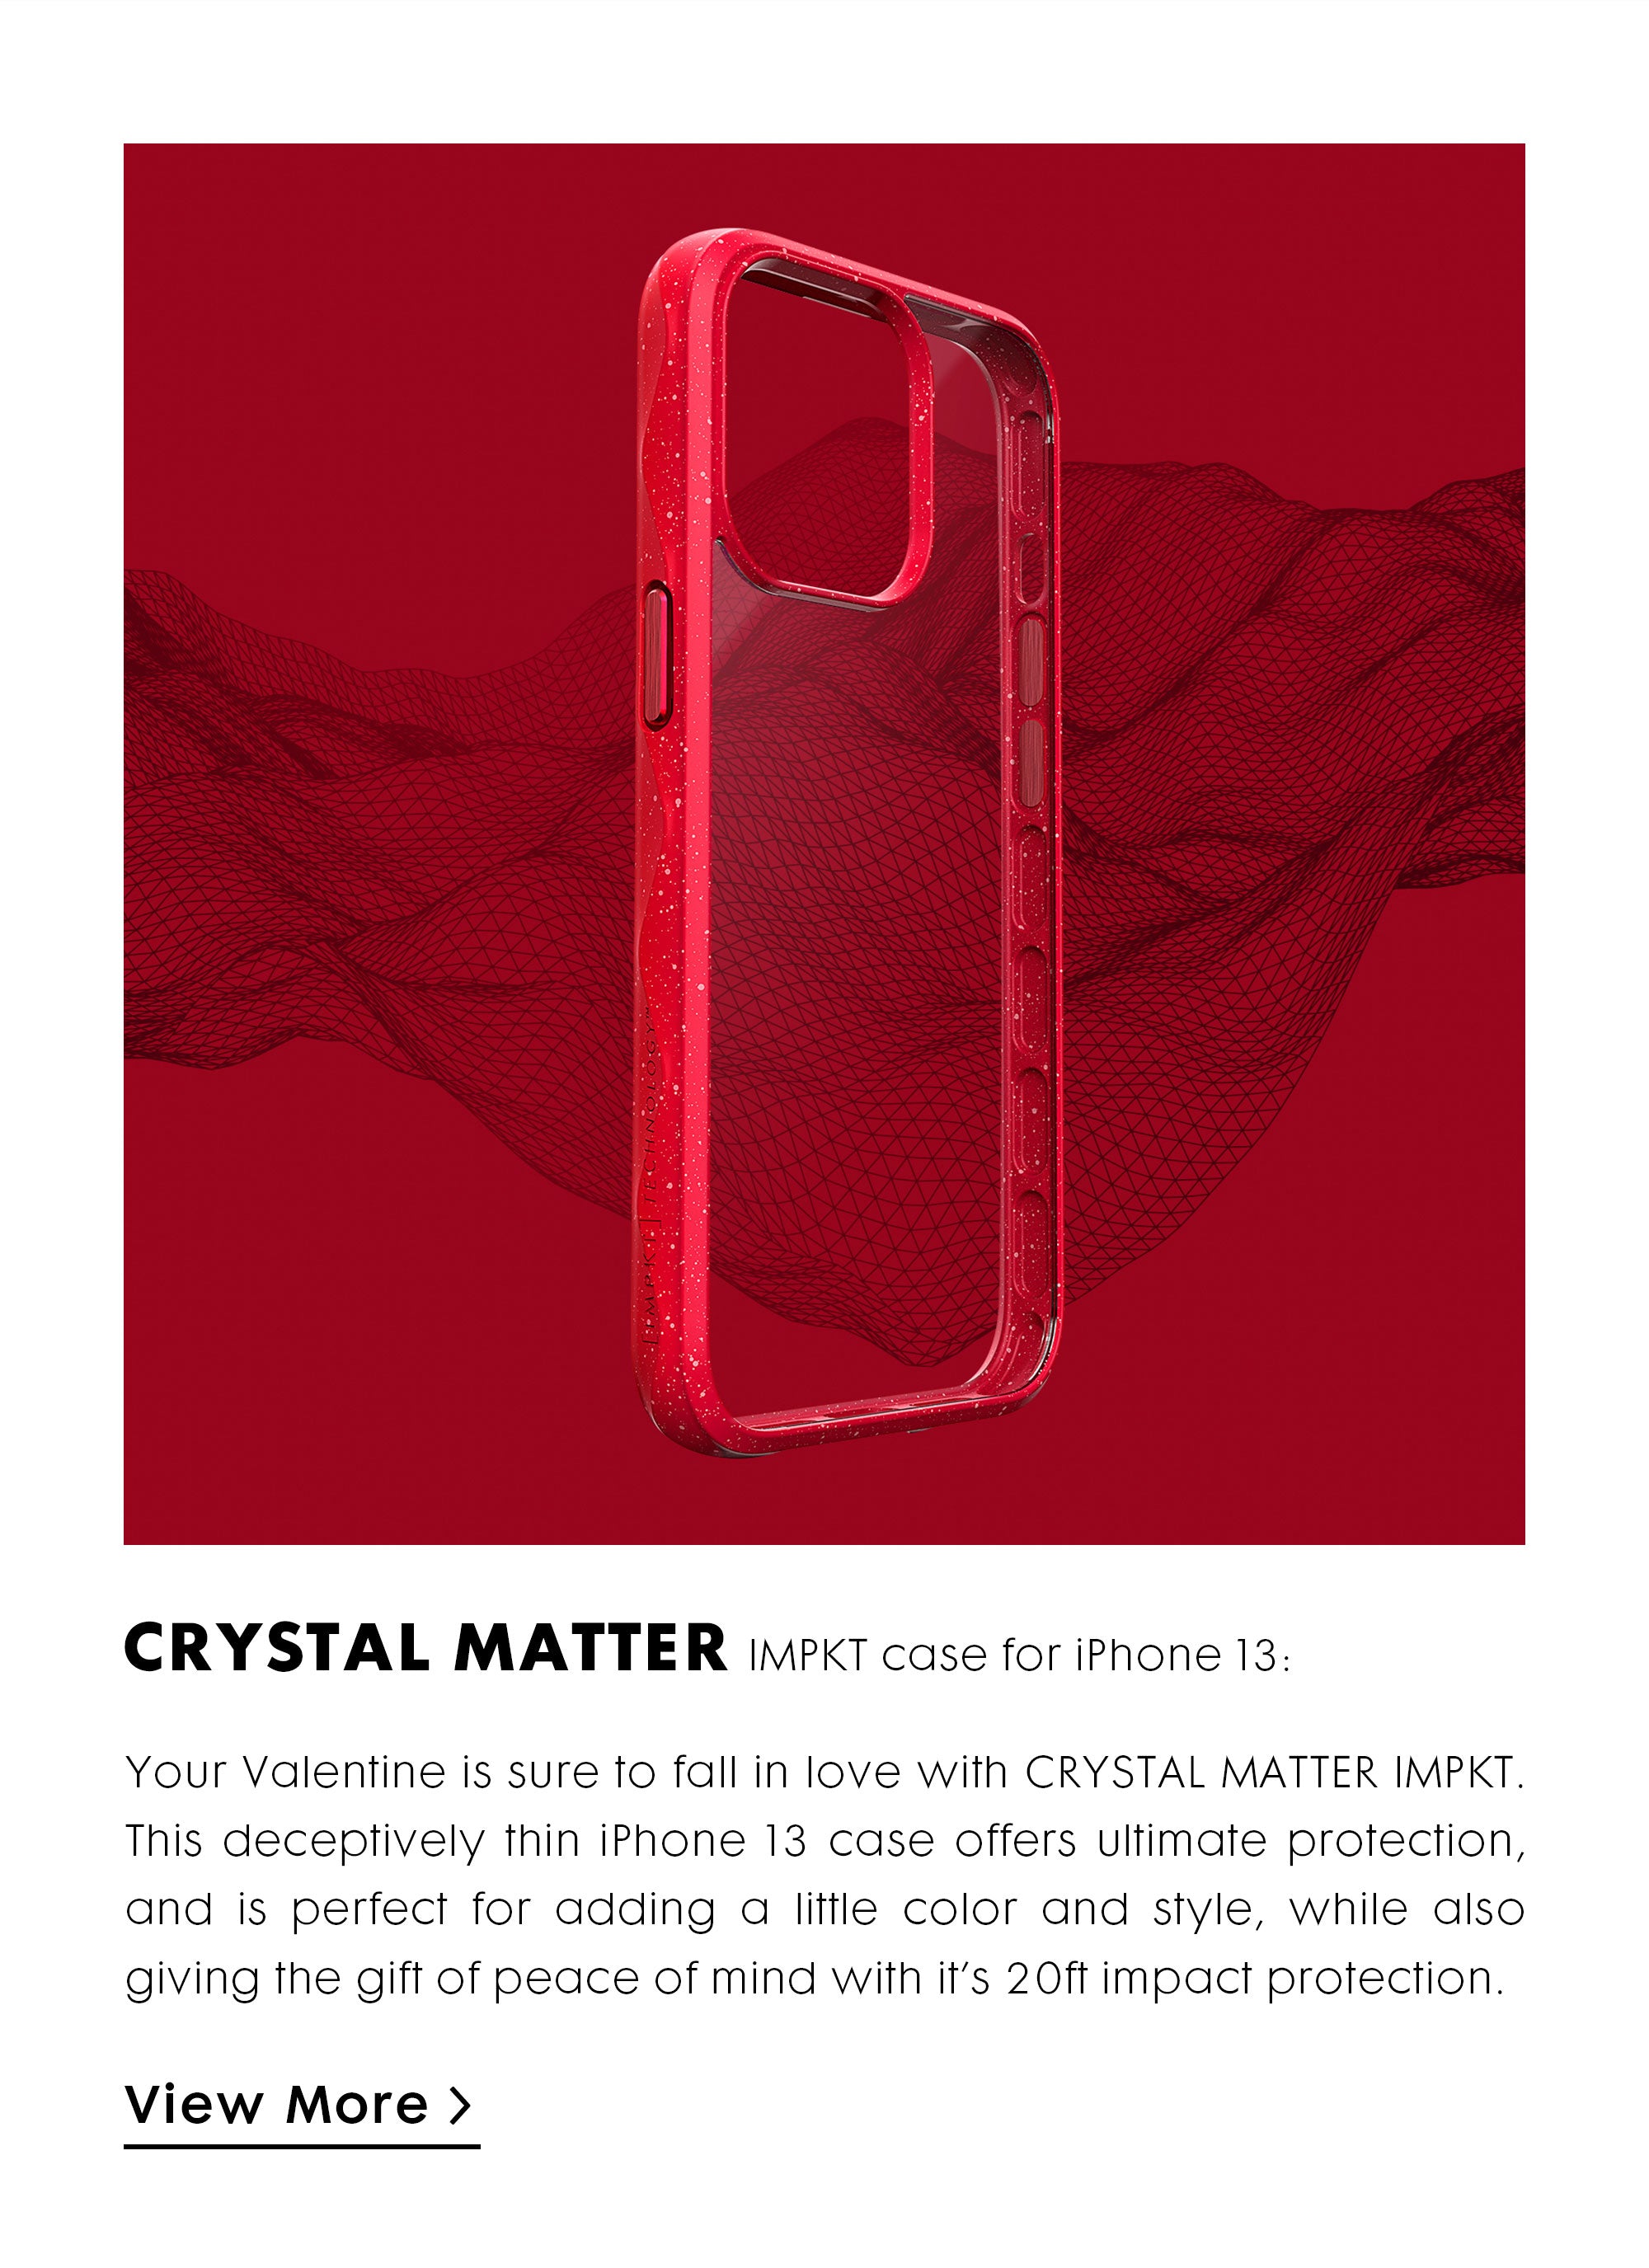 Your Valentine is sure to fall in love with CRYSTAL MATTER IMPKT. This deceptively thin iPhone 13 case offers ultimate protection, and is perfect for adding a little color and style, while also giving the gift of peace of mind with it’s 20ft impact protection.